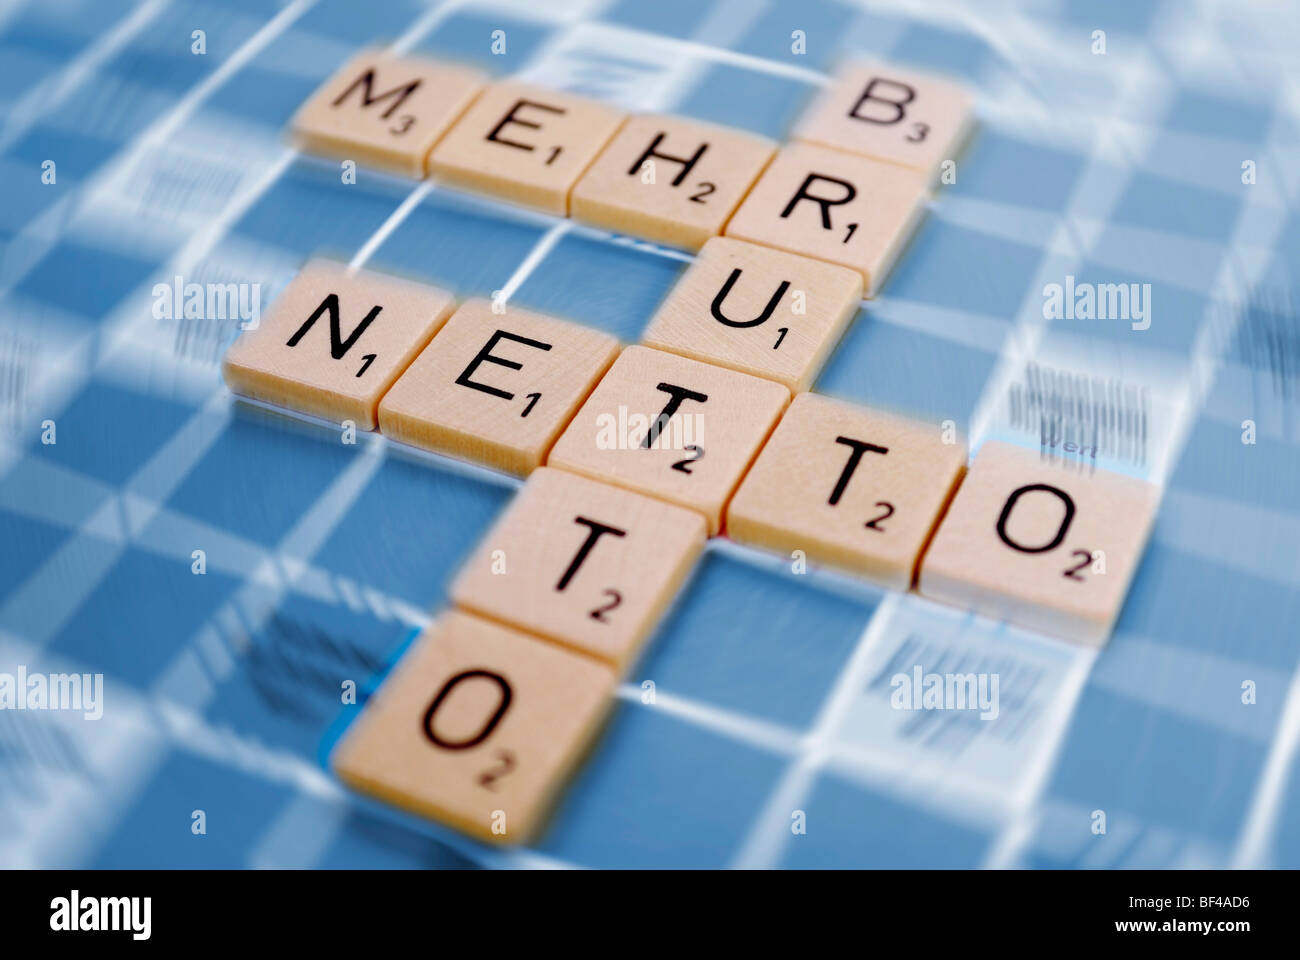 The words 'Brutto', 'mehr ' and 'Netto', German for 'more netto from brutto', composed of tiles, symbolic image for tax cut, pa Stock Photo